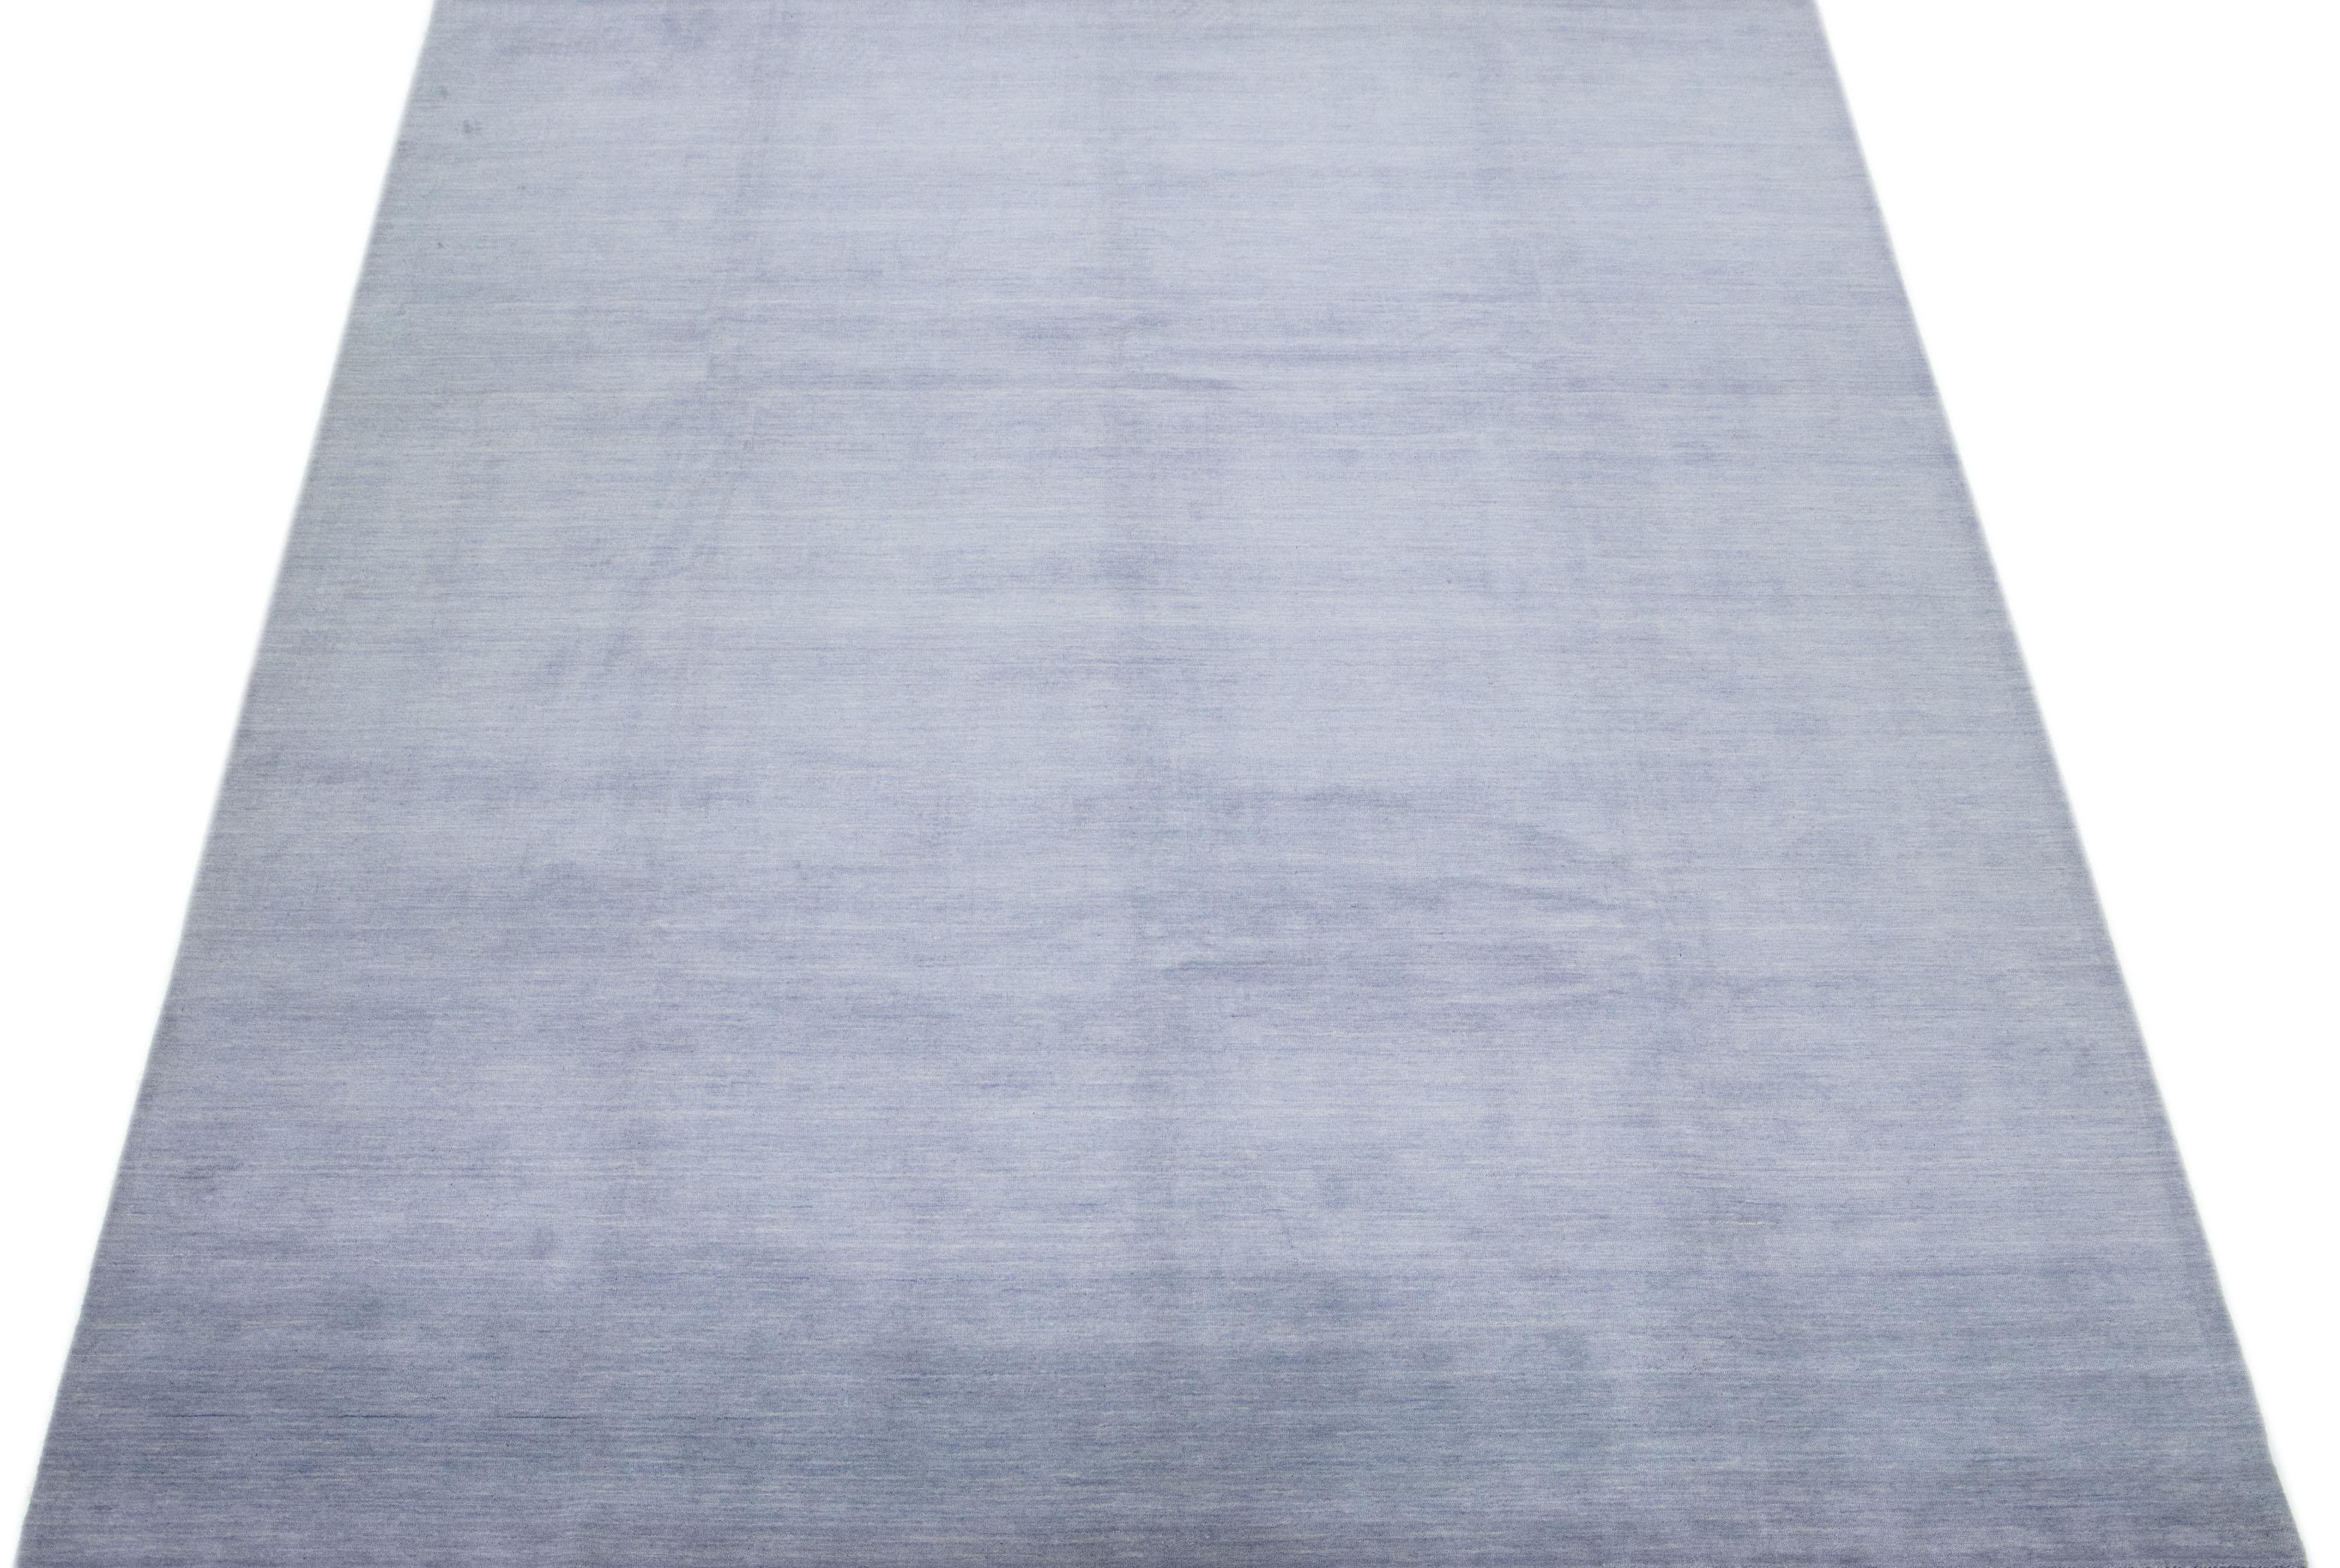 The contemporary appeal of this woolen rug, in the style of Gabbeh, lies in its Solid gray color field. The hand-woven piece is sure to catch the eye with its modern design.

This rug measures 9' x 12'4